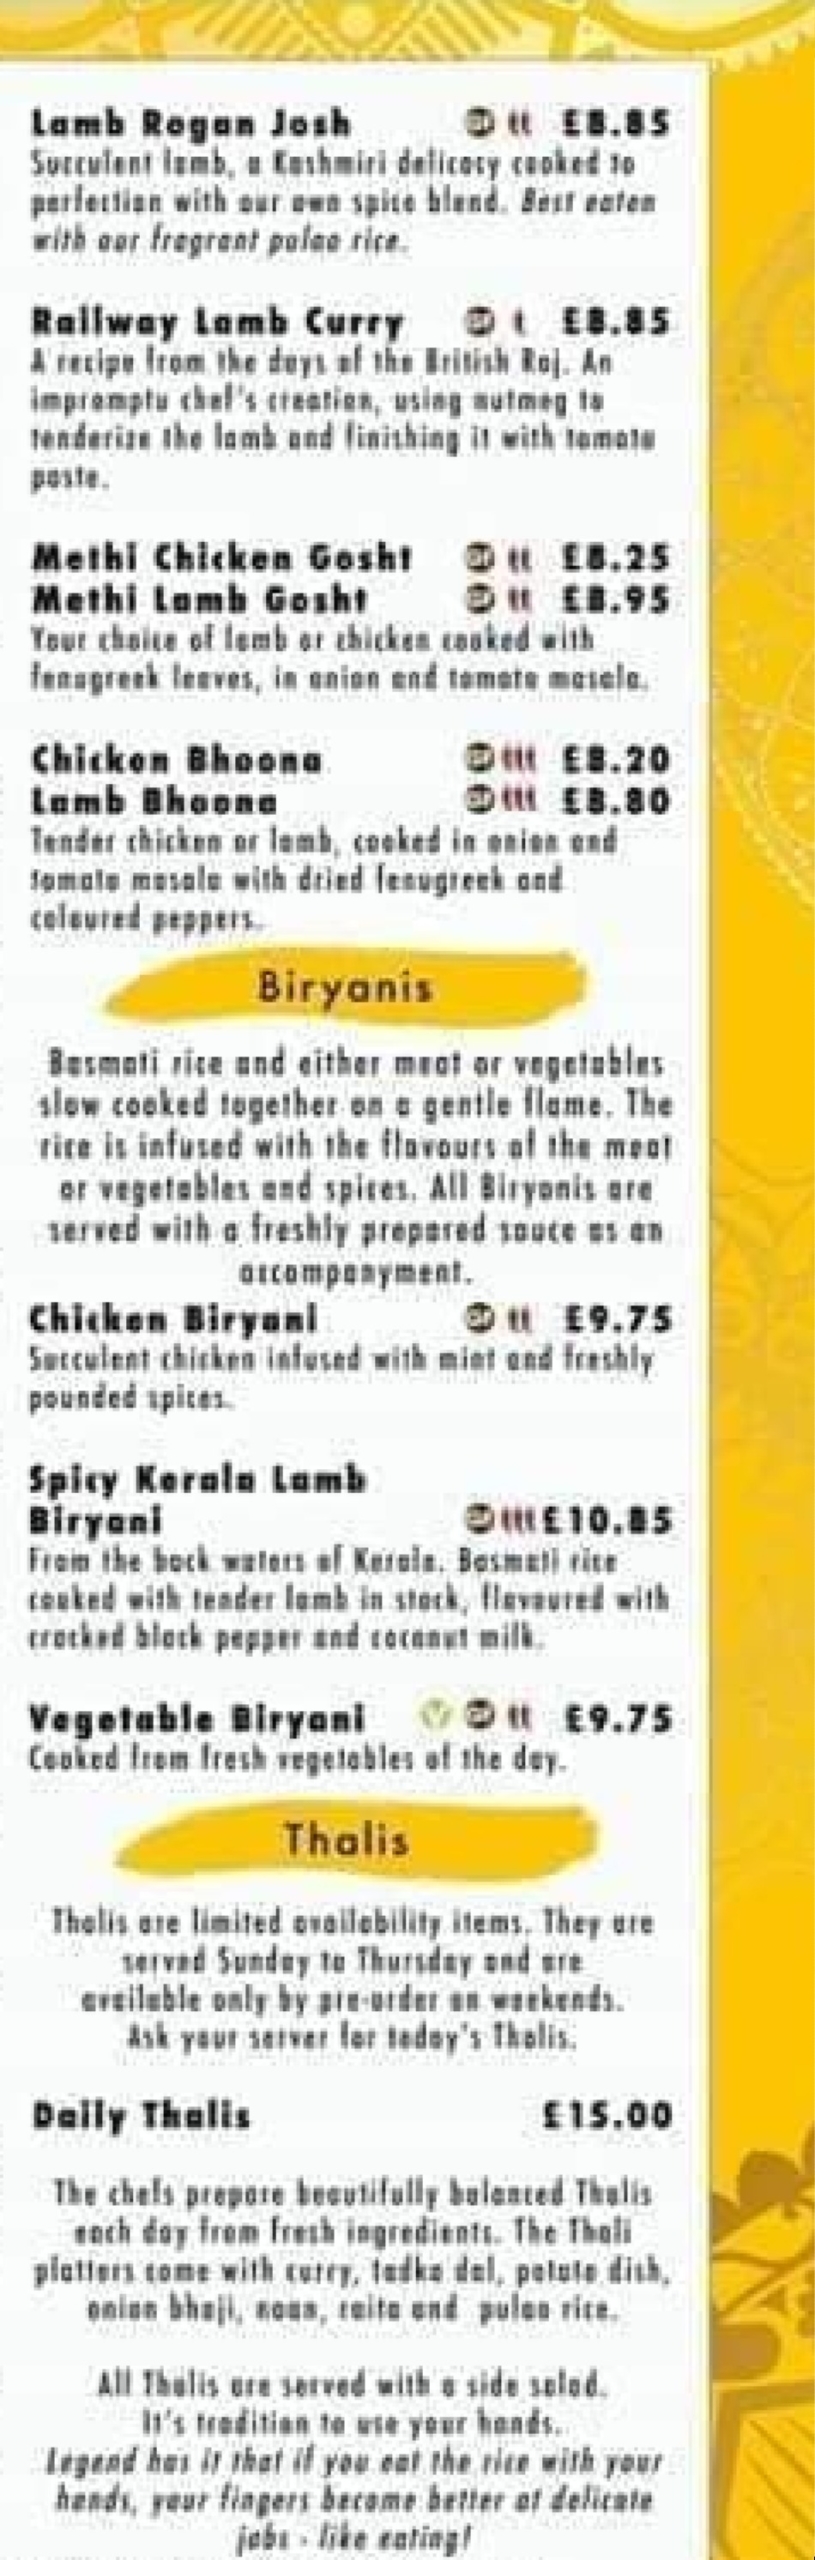 Takeaway Restaurant Menu Page - Curry on the Curve Indian Dining - Newport